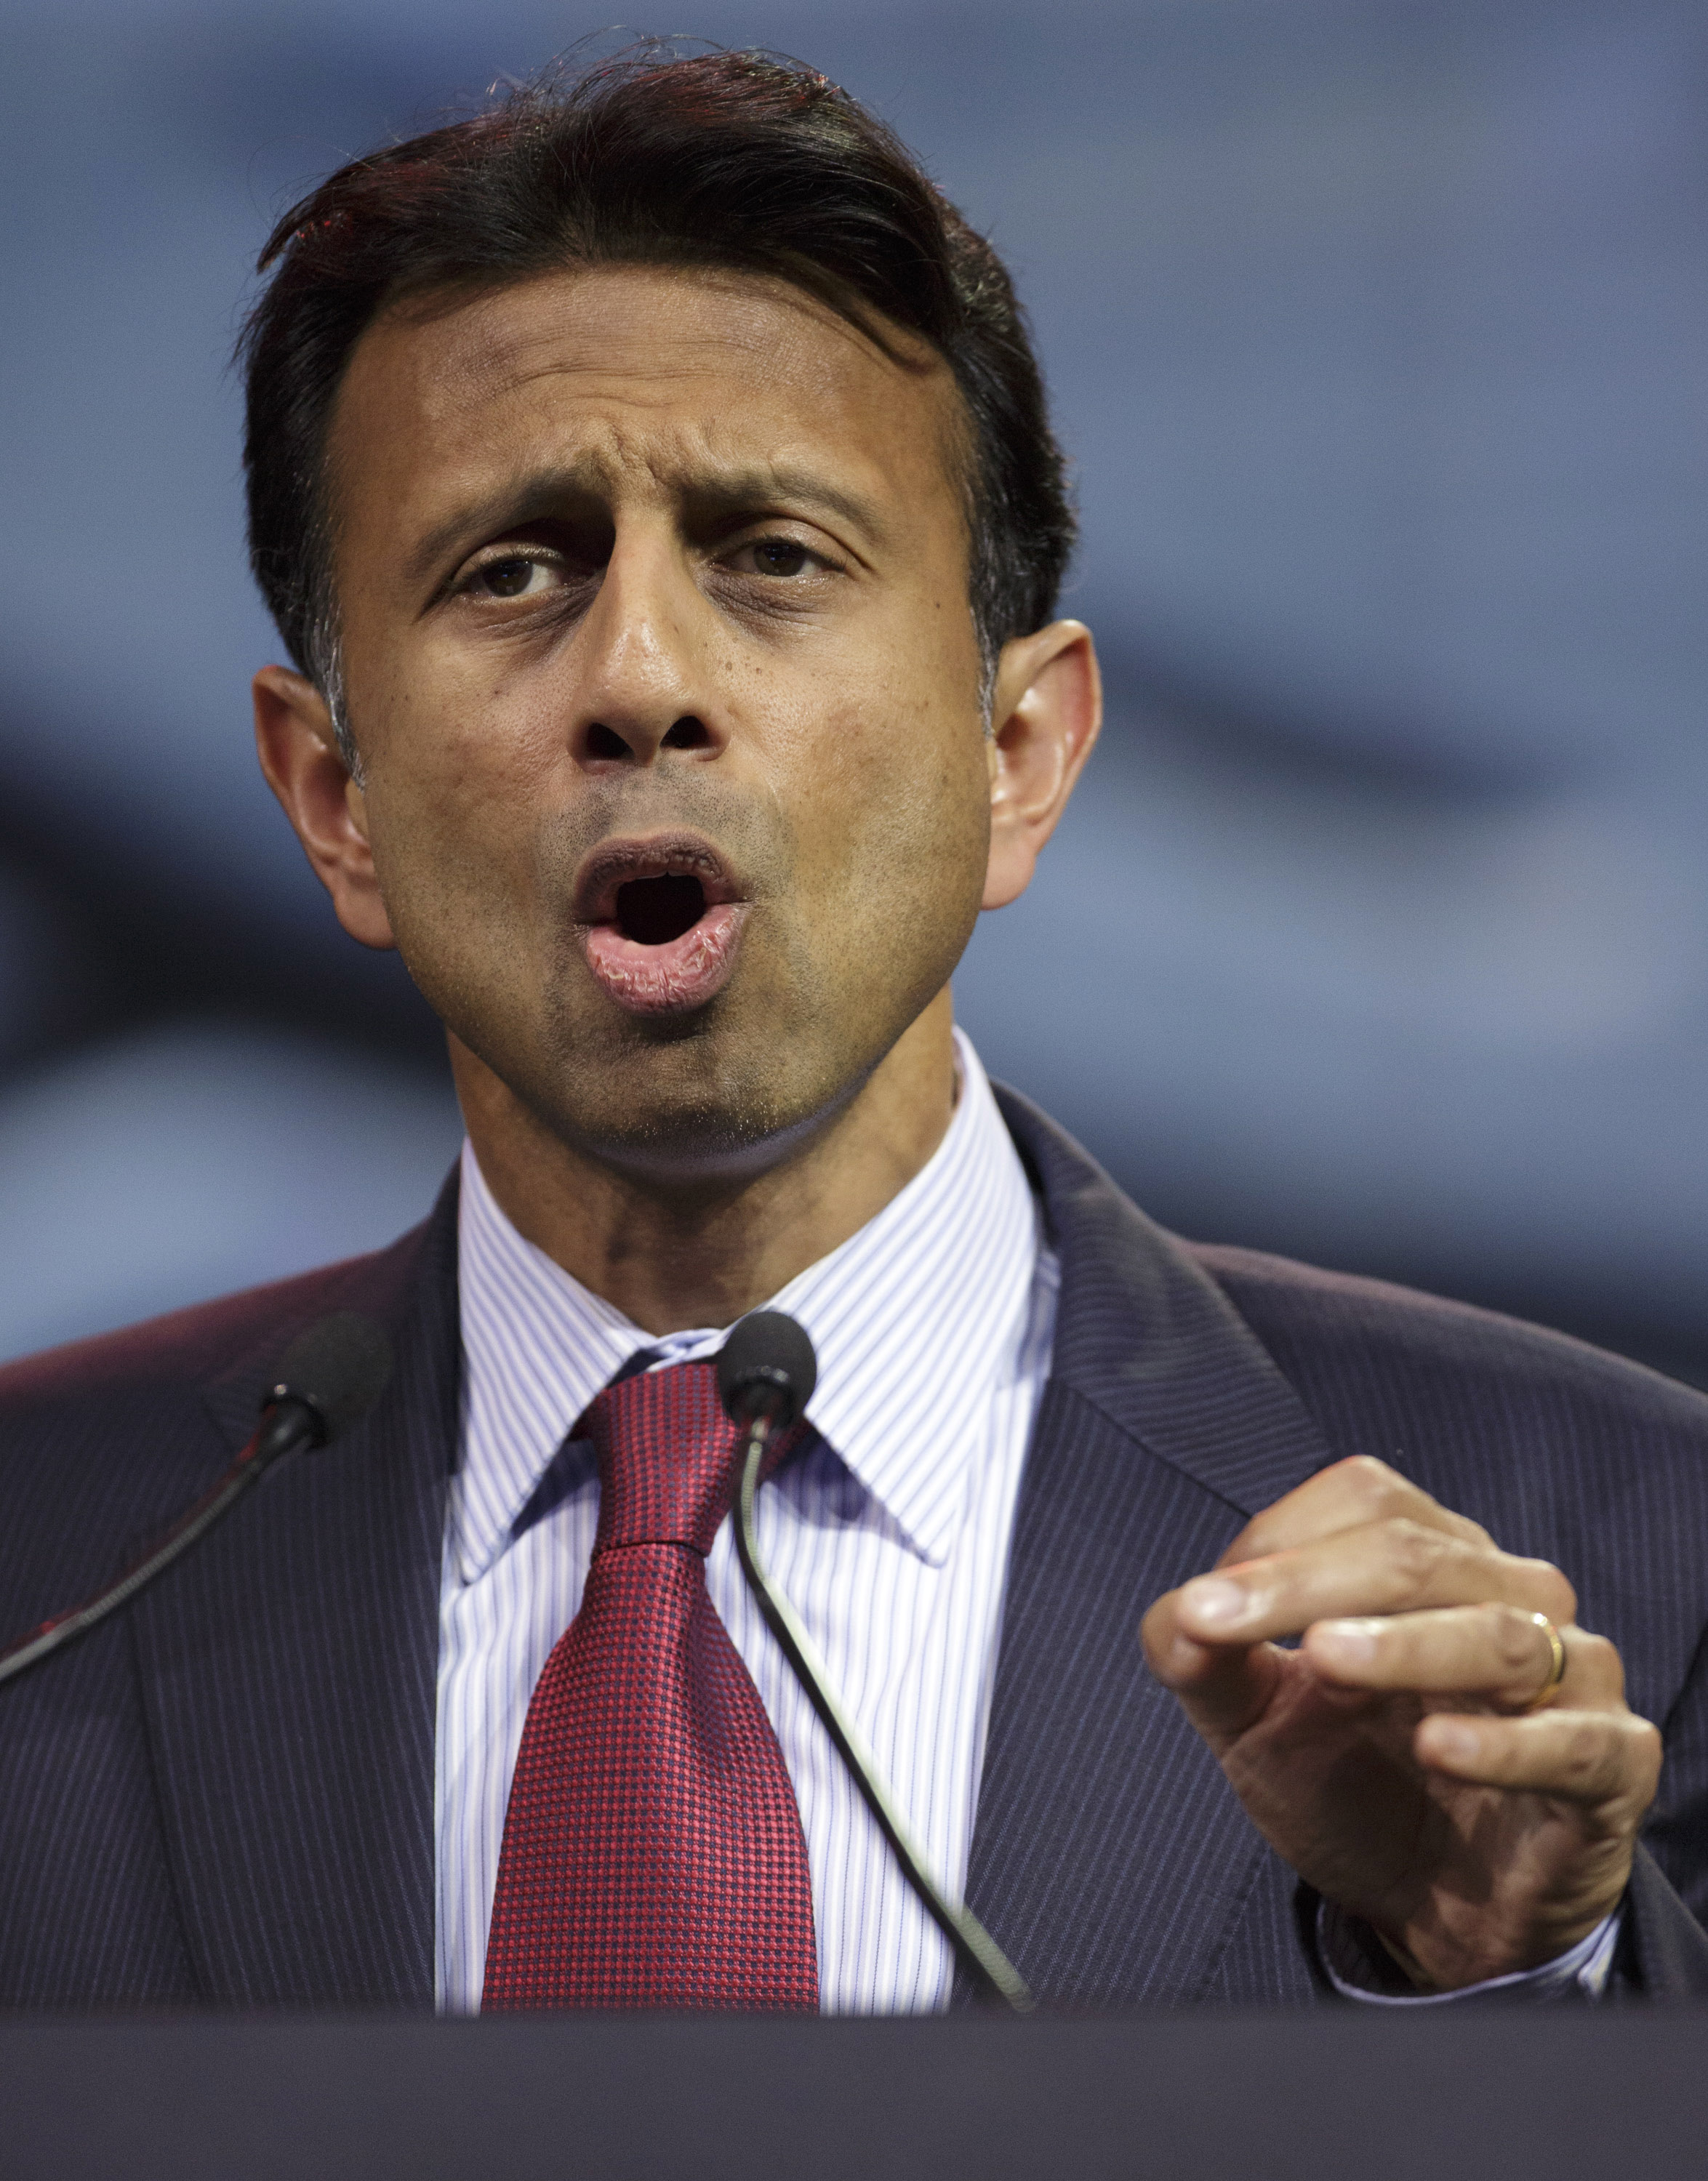 Louisiana Governor Bobby Jindal speaks during the National Rifle Association Annual Meeting Leadership Forum on April 25, 2014 in Indianapolis, Indiana. (John Gress&mdash;Getty Images)